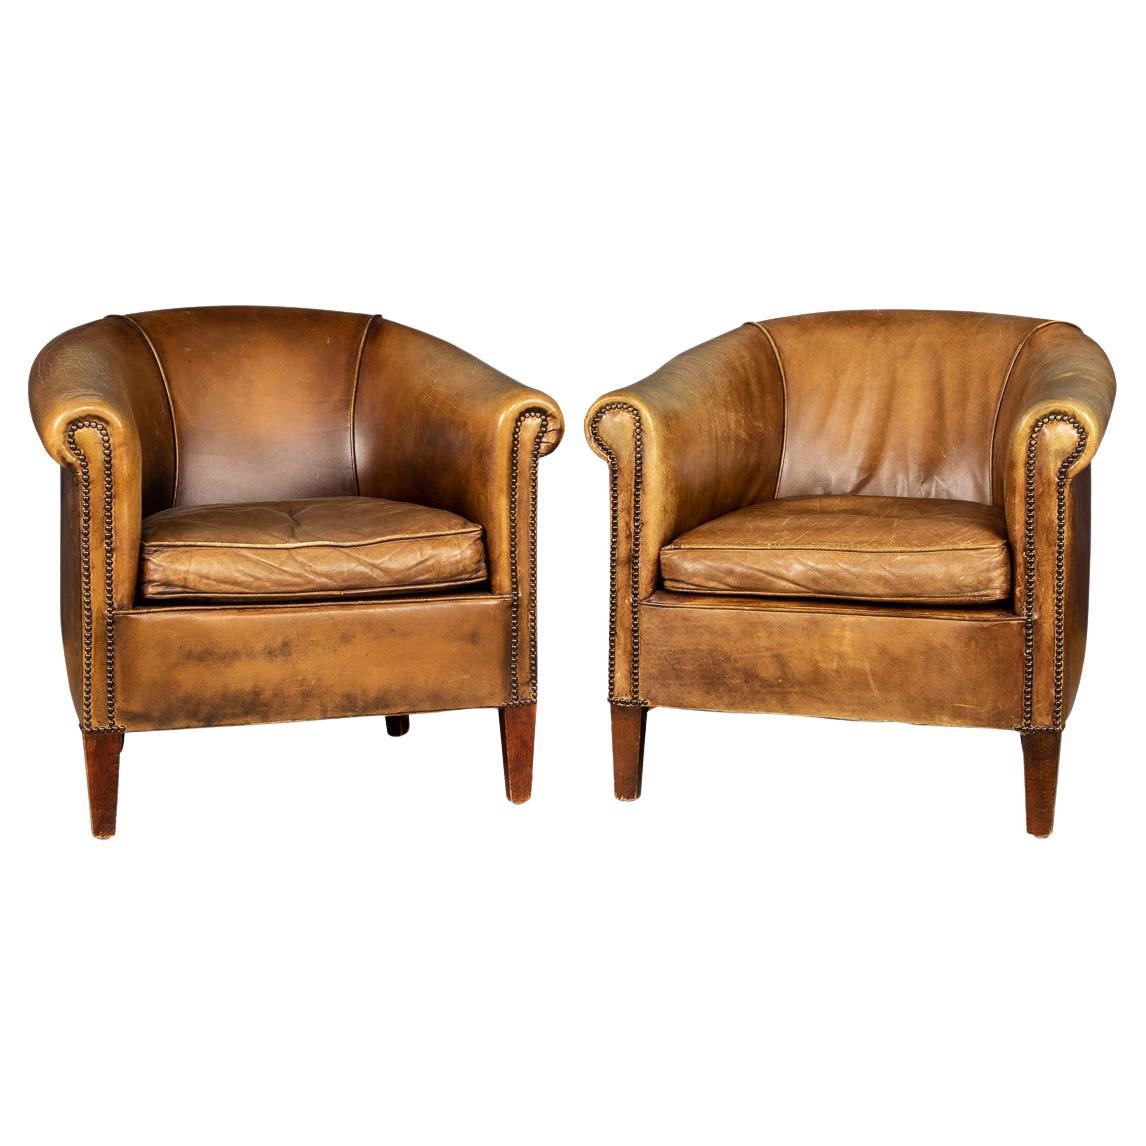 What is the difference between a club chair and an armchair?